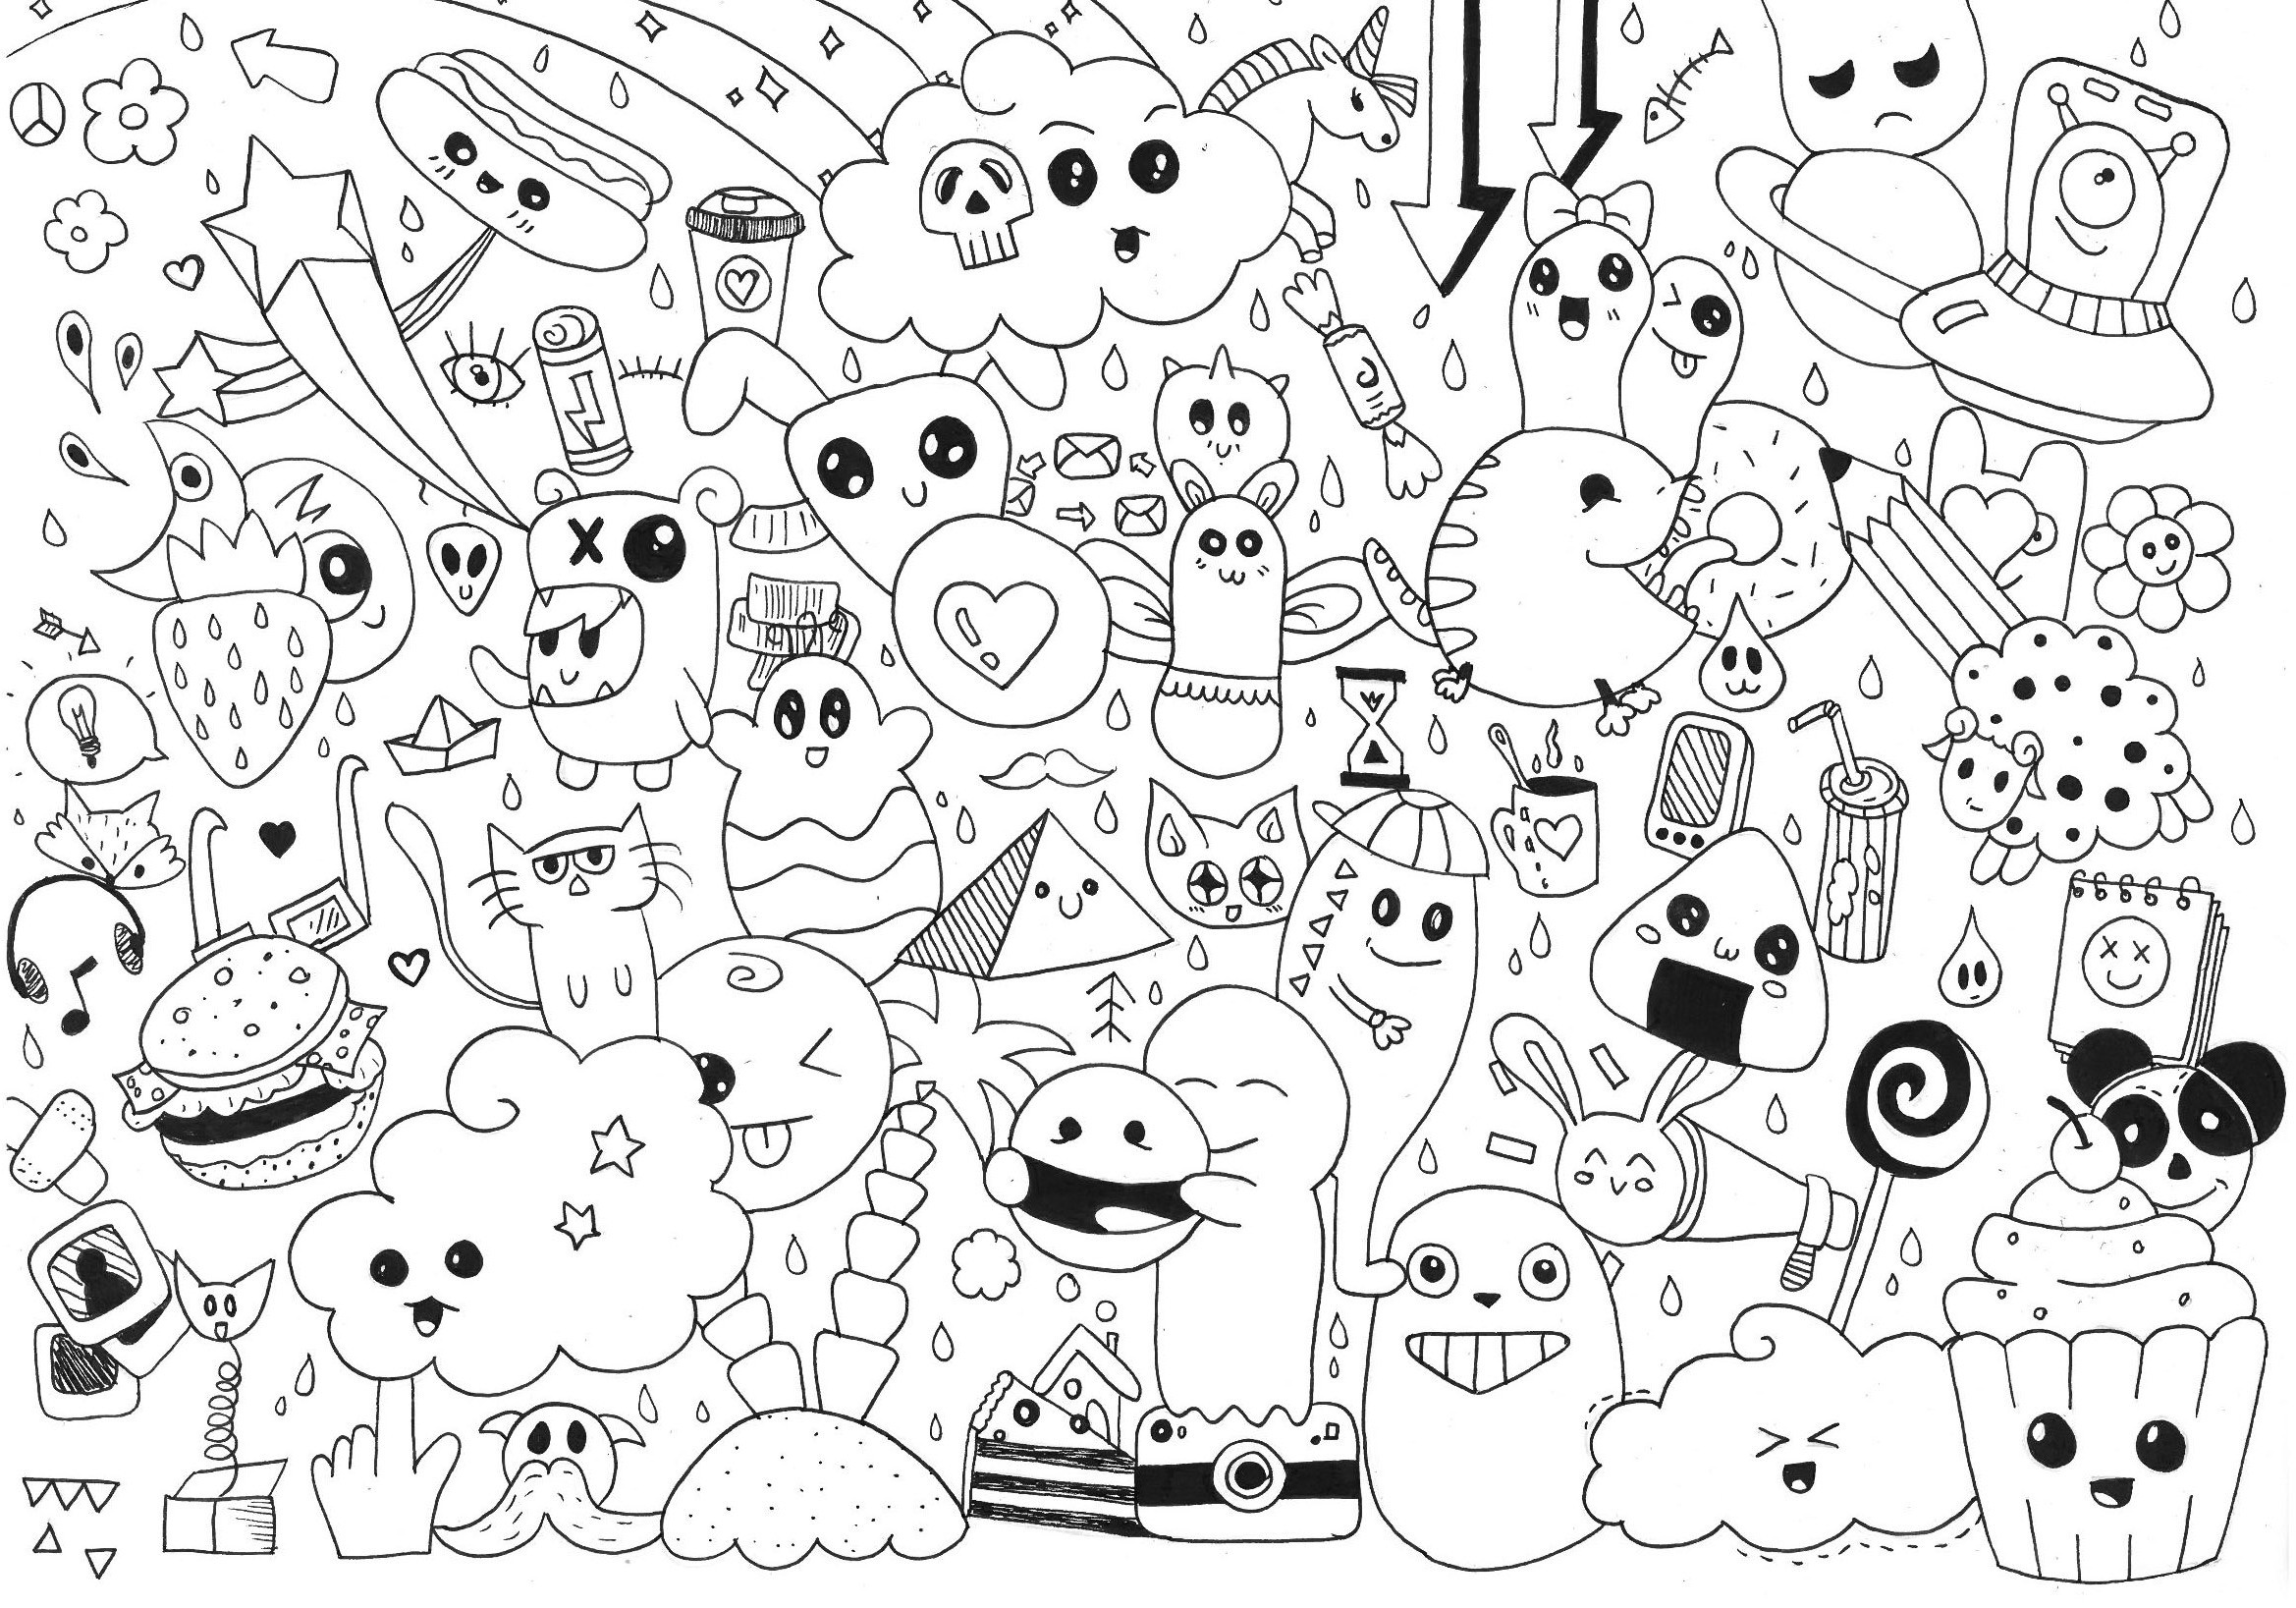 Coloring ~ Doodle Art Coloring Pages Www Allanlichtman Com For - Free Printable Doodle Art Coloring Pages